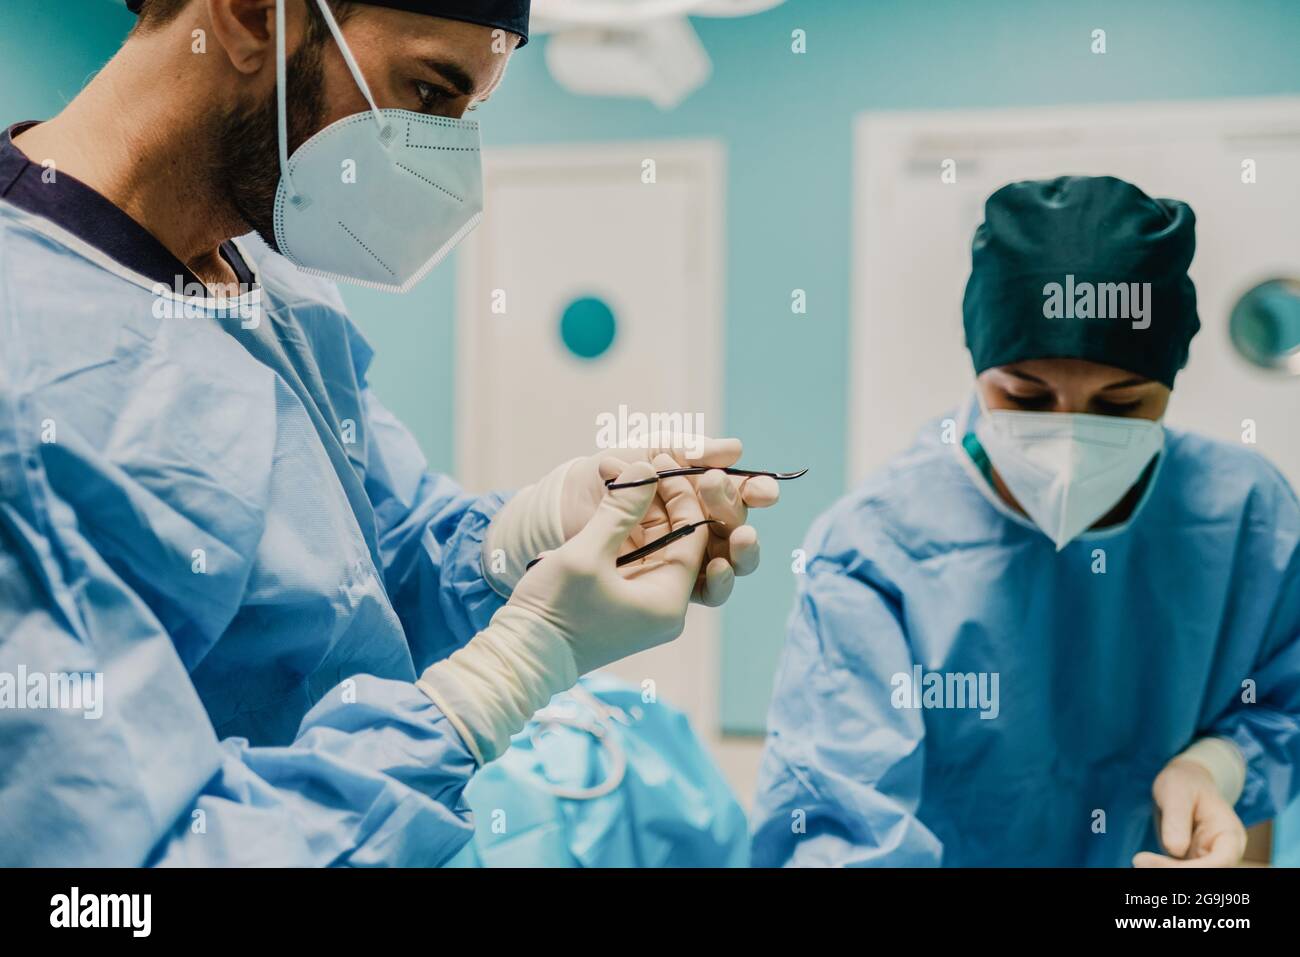 Medical doctors preparing surgical equipment for operation inside private clinic - Focus on male doctor face Stock Photo